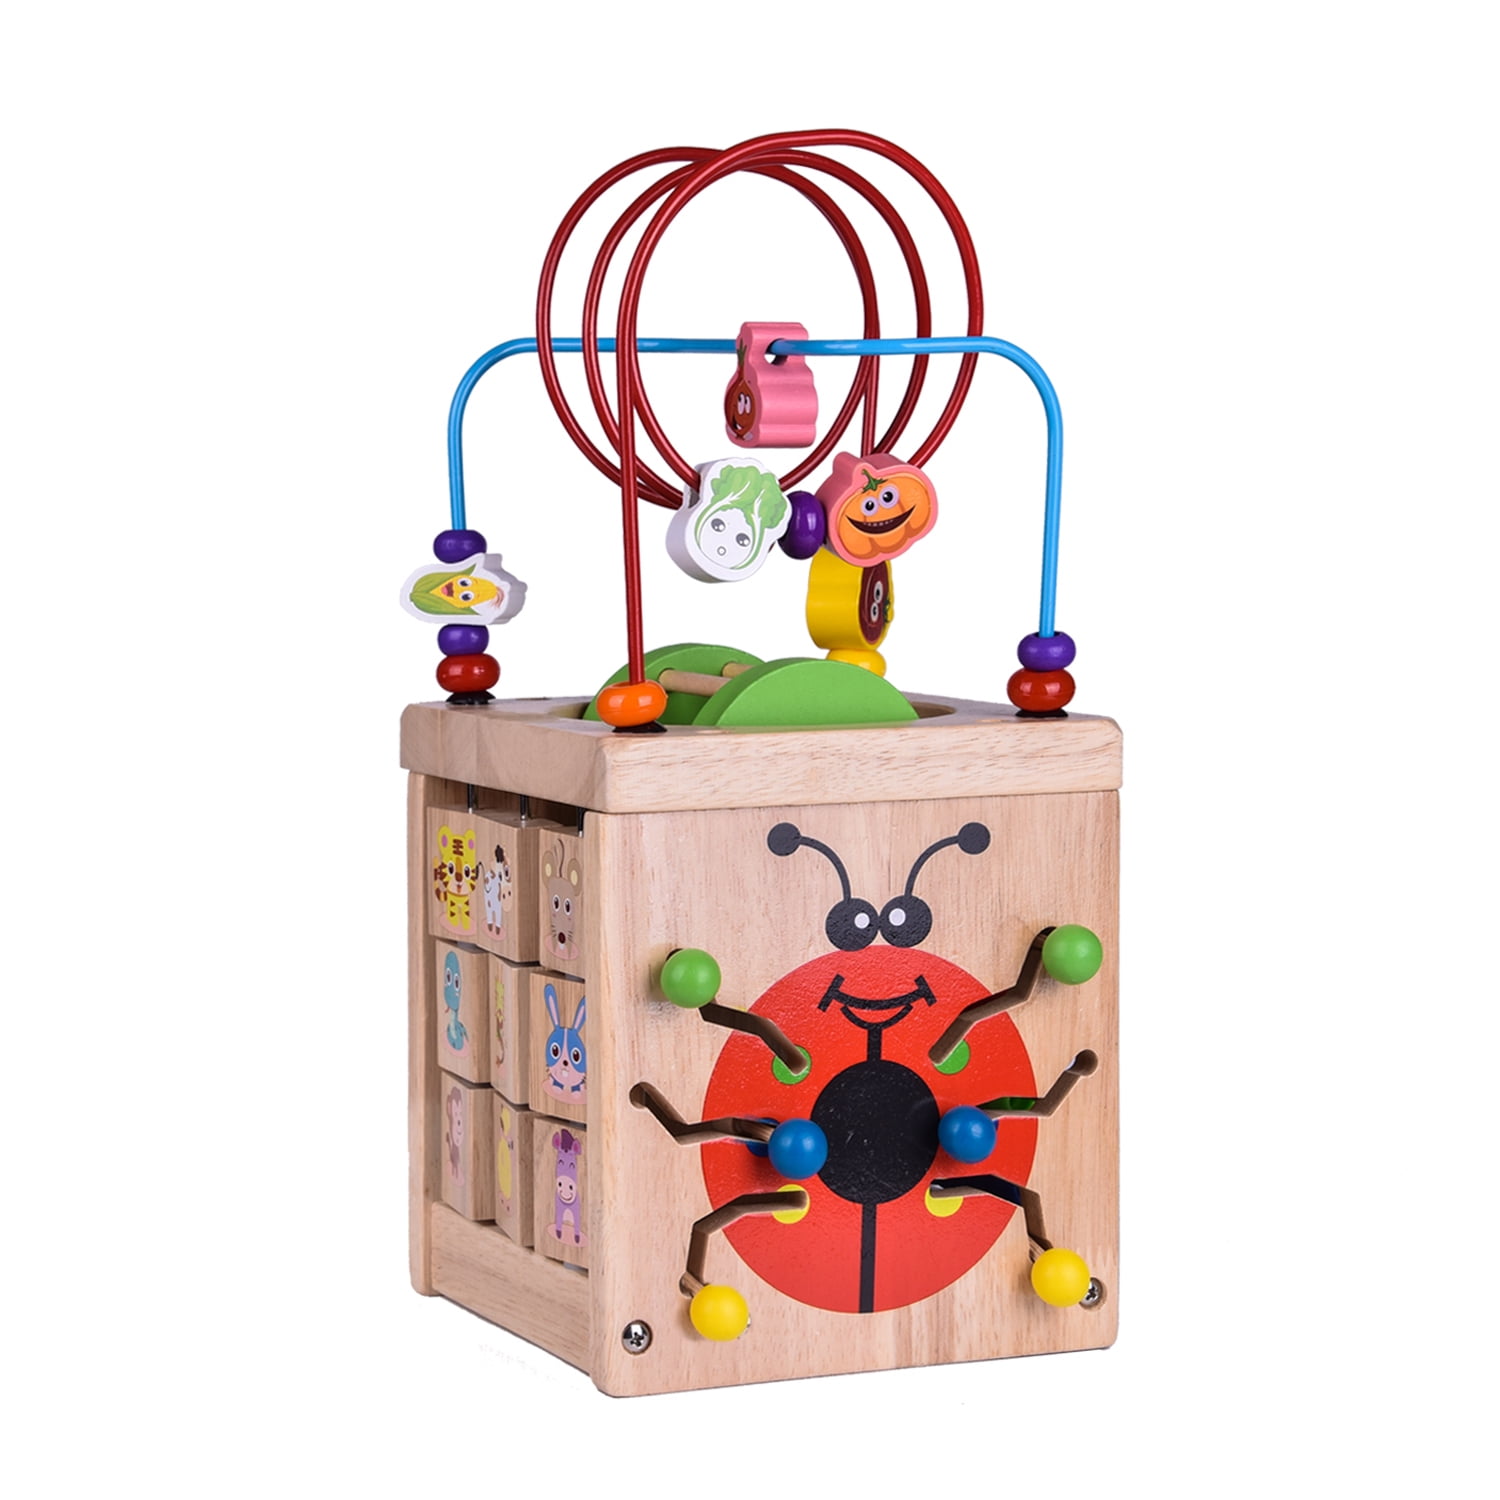 Details about   Child Learning Wooden Activity Multifunctional bead Cube Maze Toys kids Gift USA 